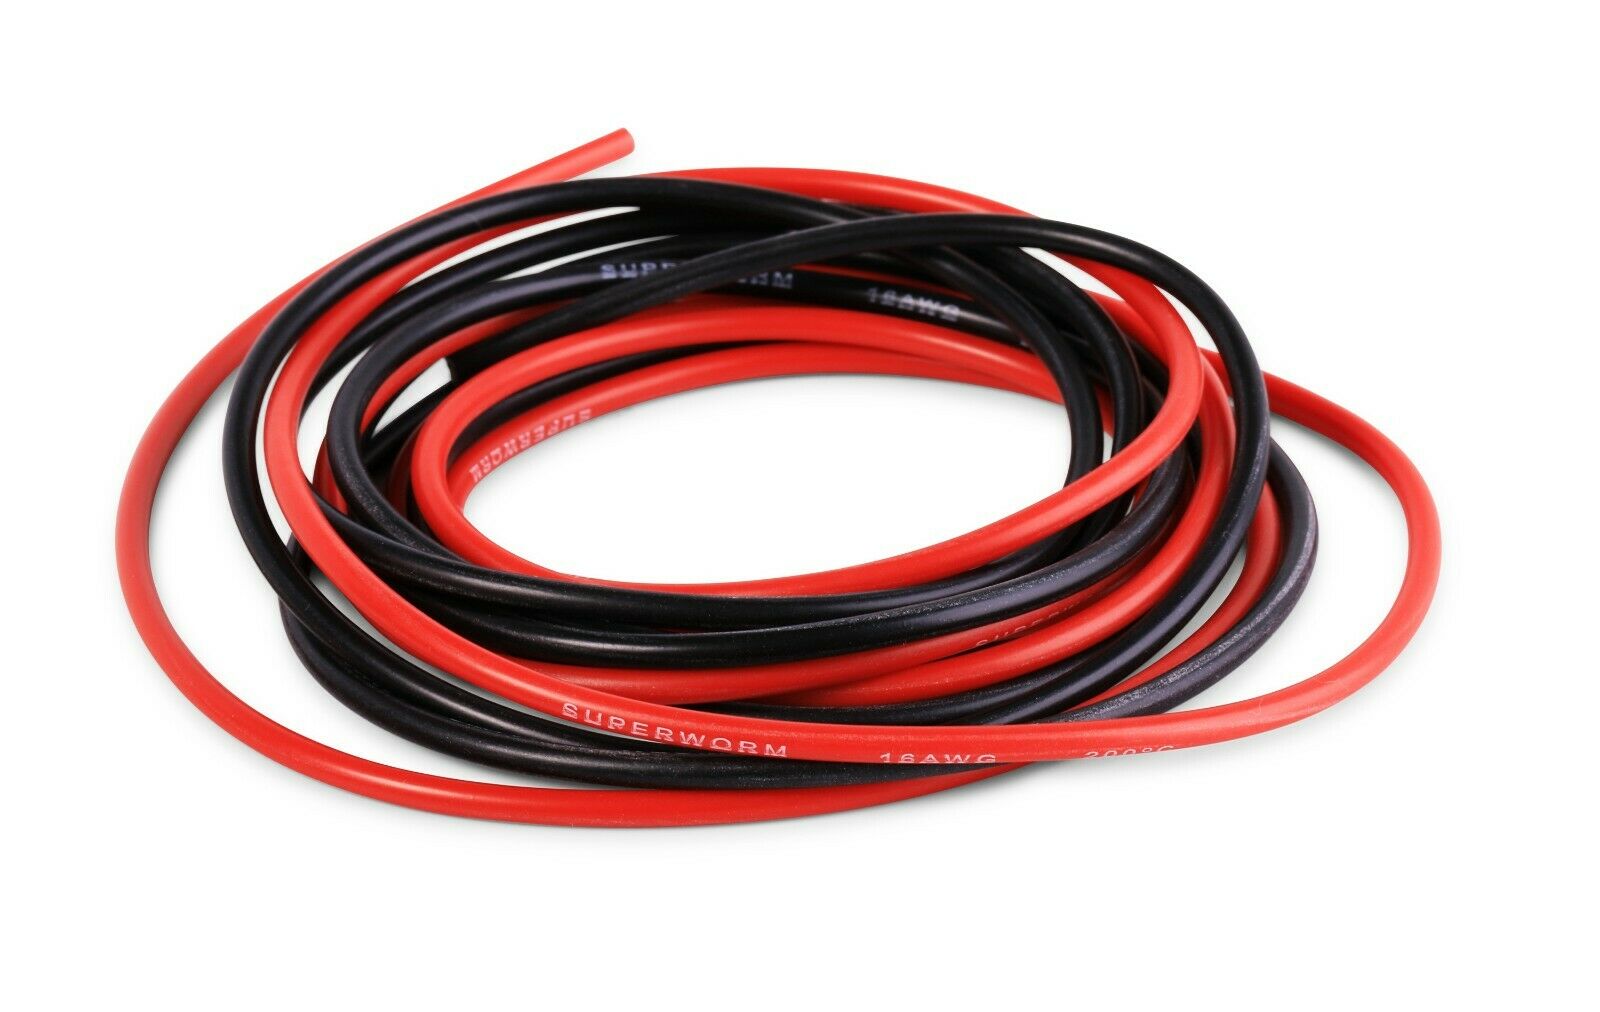 16 Gauge Silicone Wire 300cm - 16 Awg Silicone Wire 10ft Flexible Silicone Wire